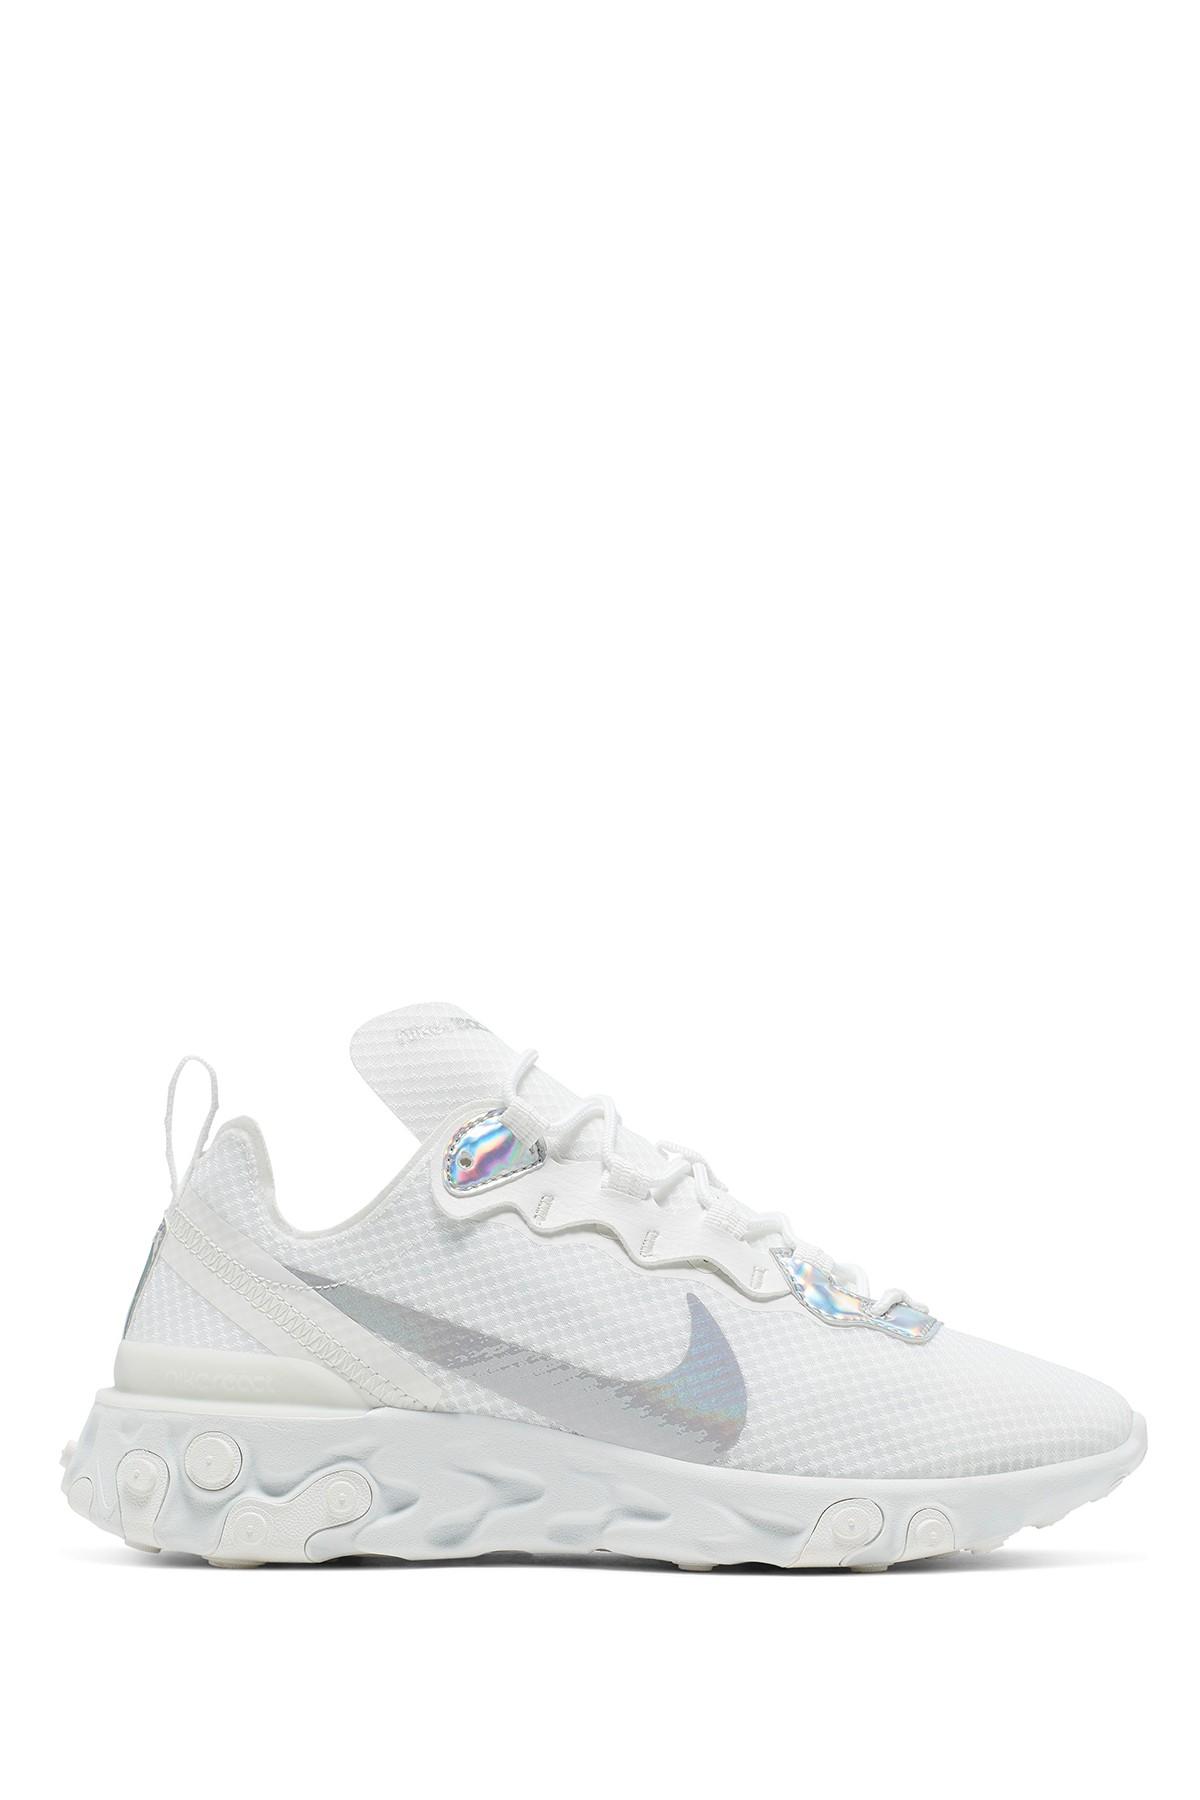 Nike React Element 55 Iridescent Shoe in White | Lyst